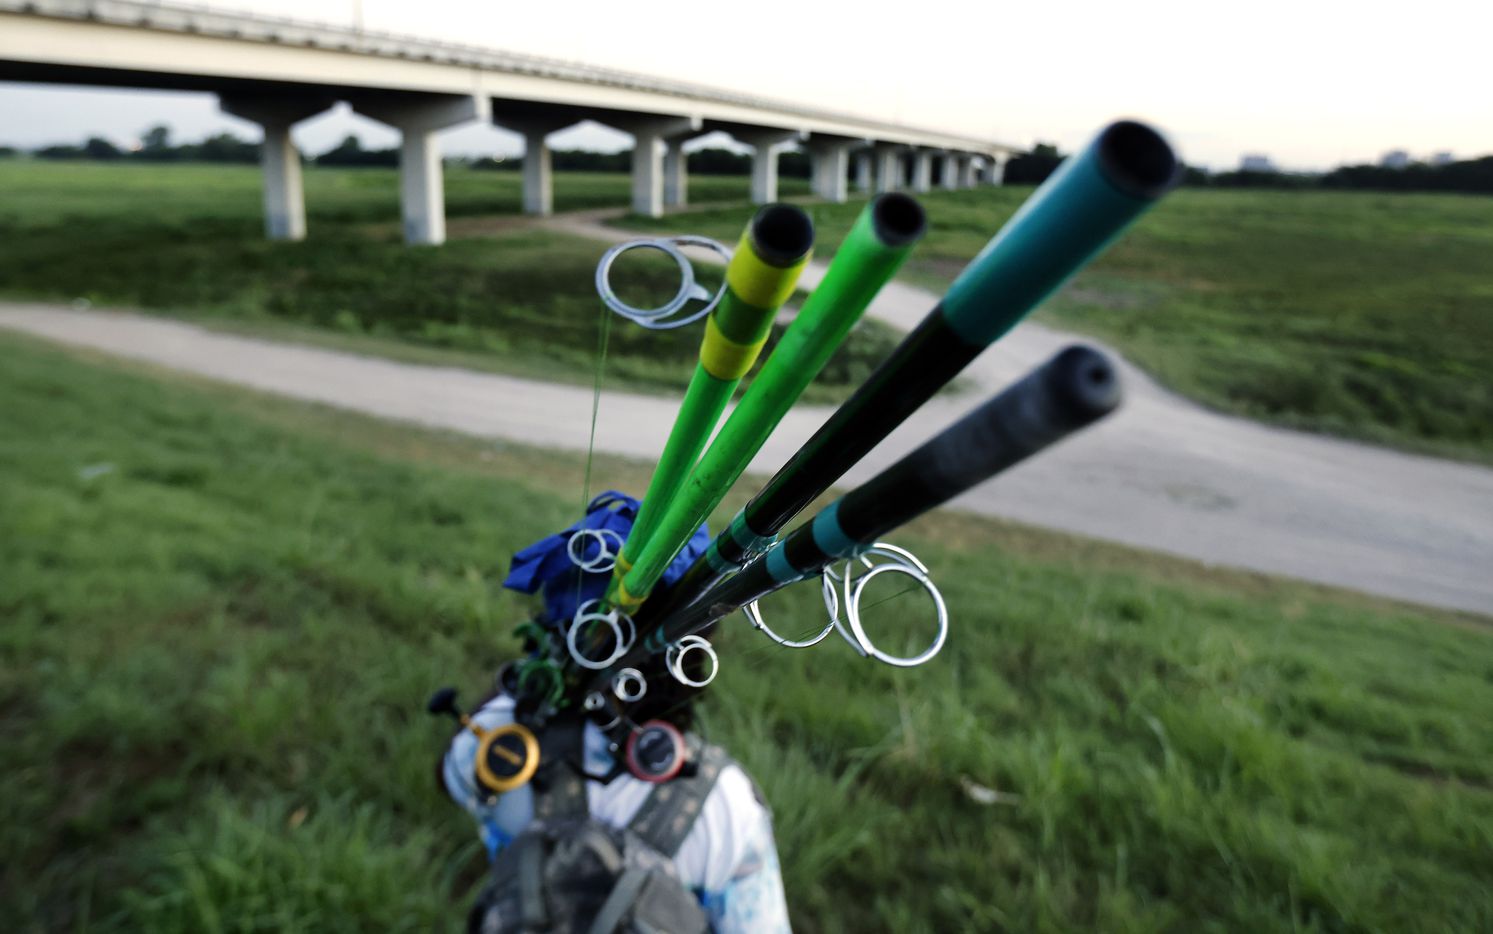 Odell Allen carries a pair of segmented 12 ft fishing poles he uses to fish for alligator gar on the Trinity River near the Westmoreland bridge, Monday, August 30, 2021.  (Tom Fox/The Dallas Morning News)